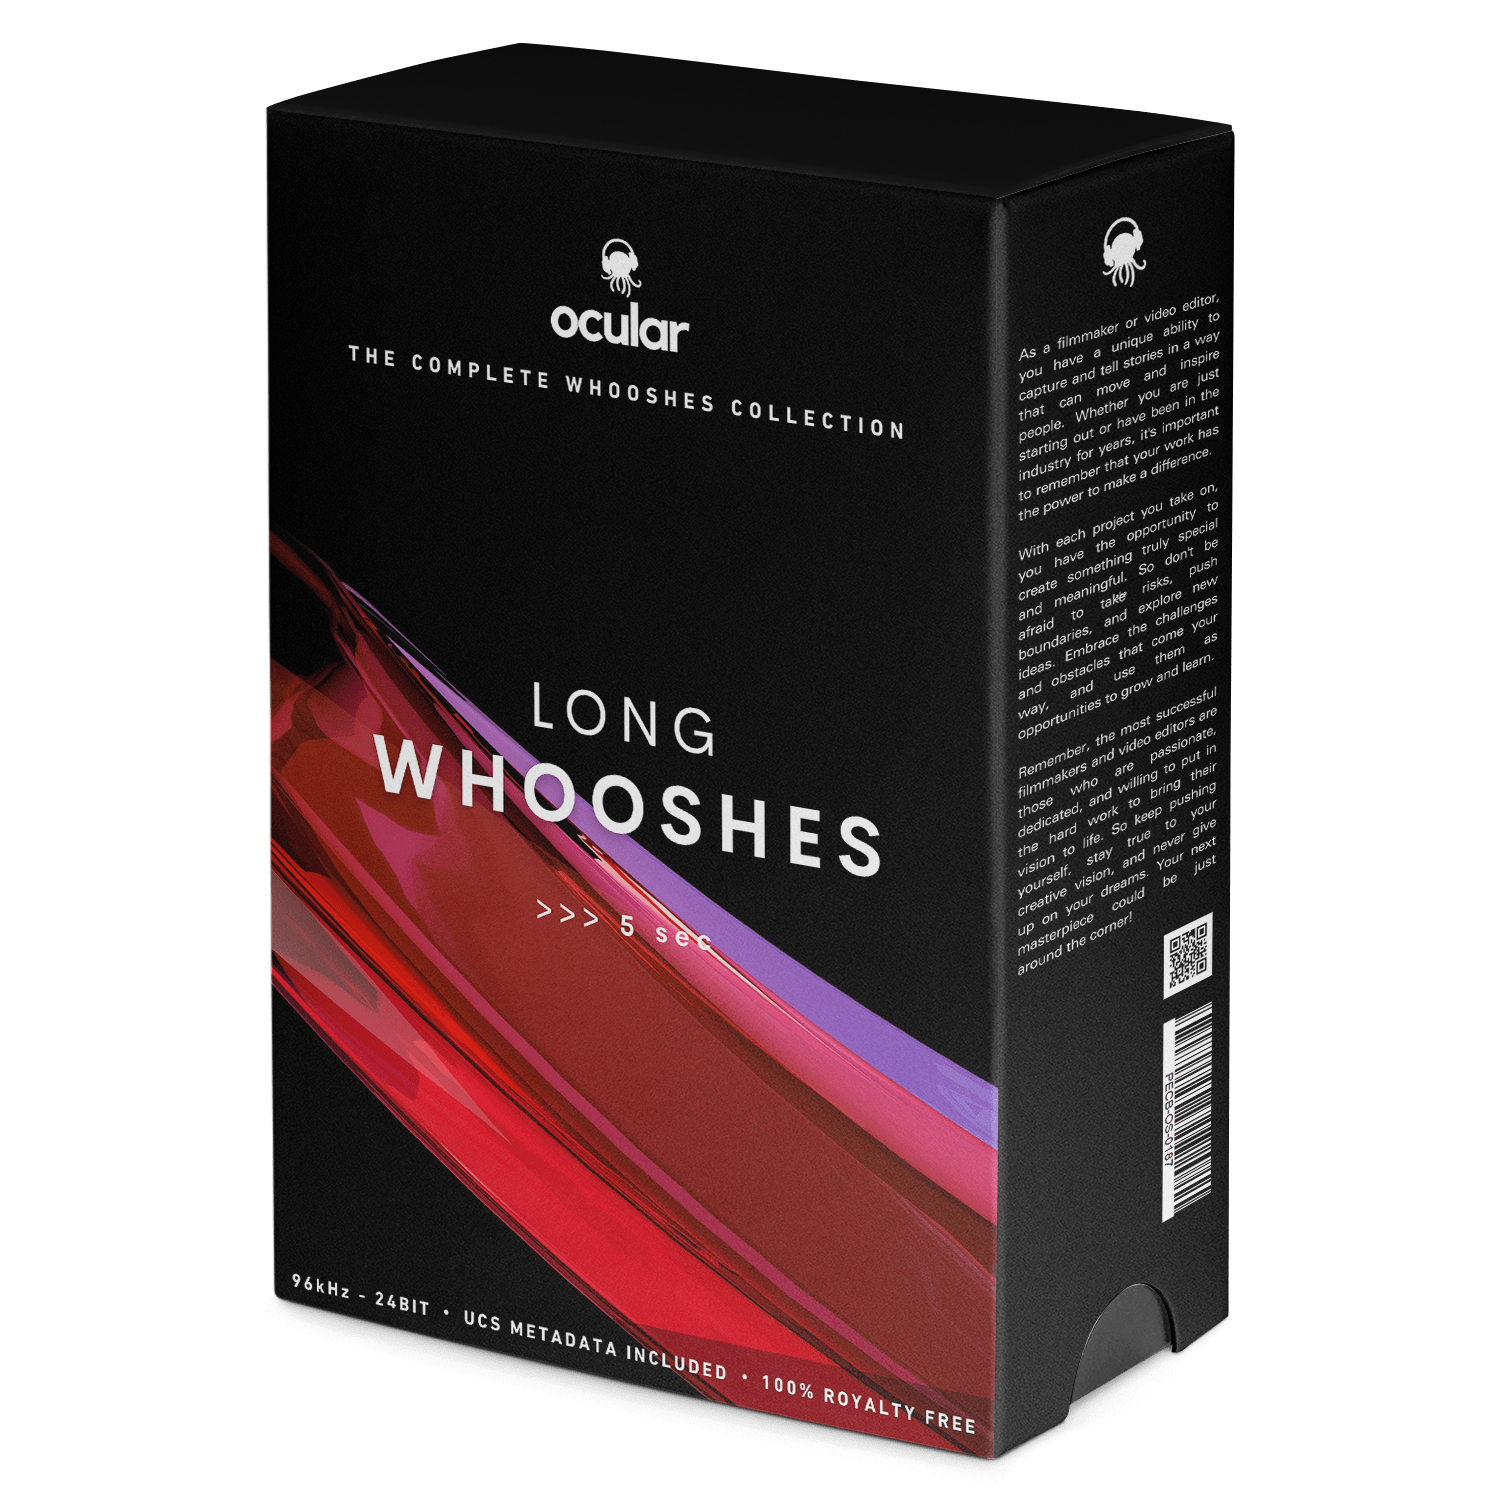 Long Whooshes Sound Effects for Video Editing. Professional Sound FX Library.